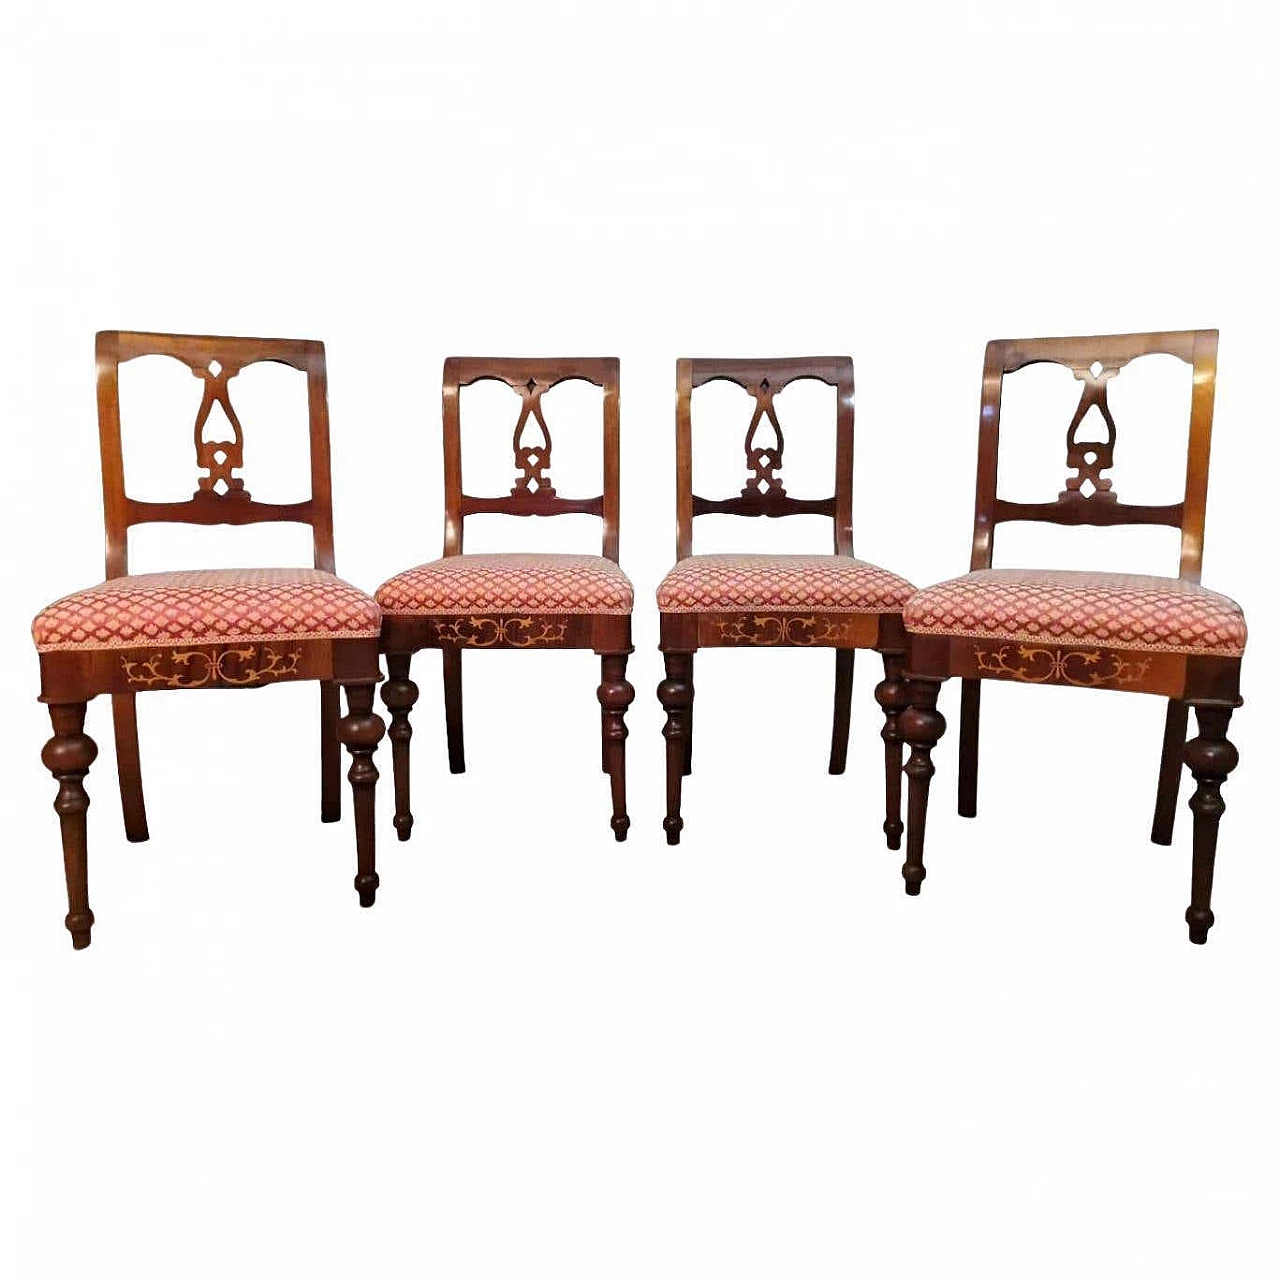 4 Biedermeier style wooden and fabric chairs, mid-19th century 1